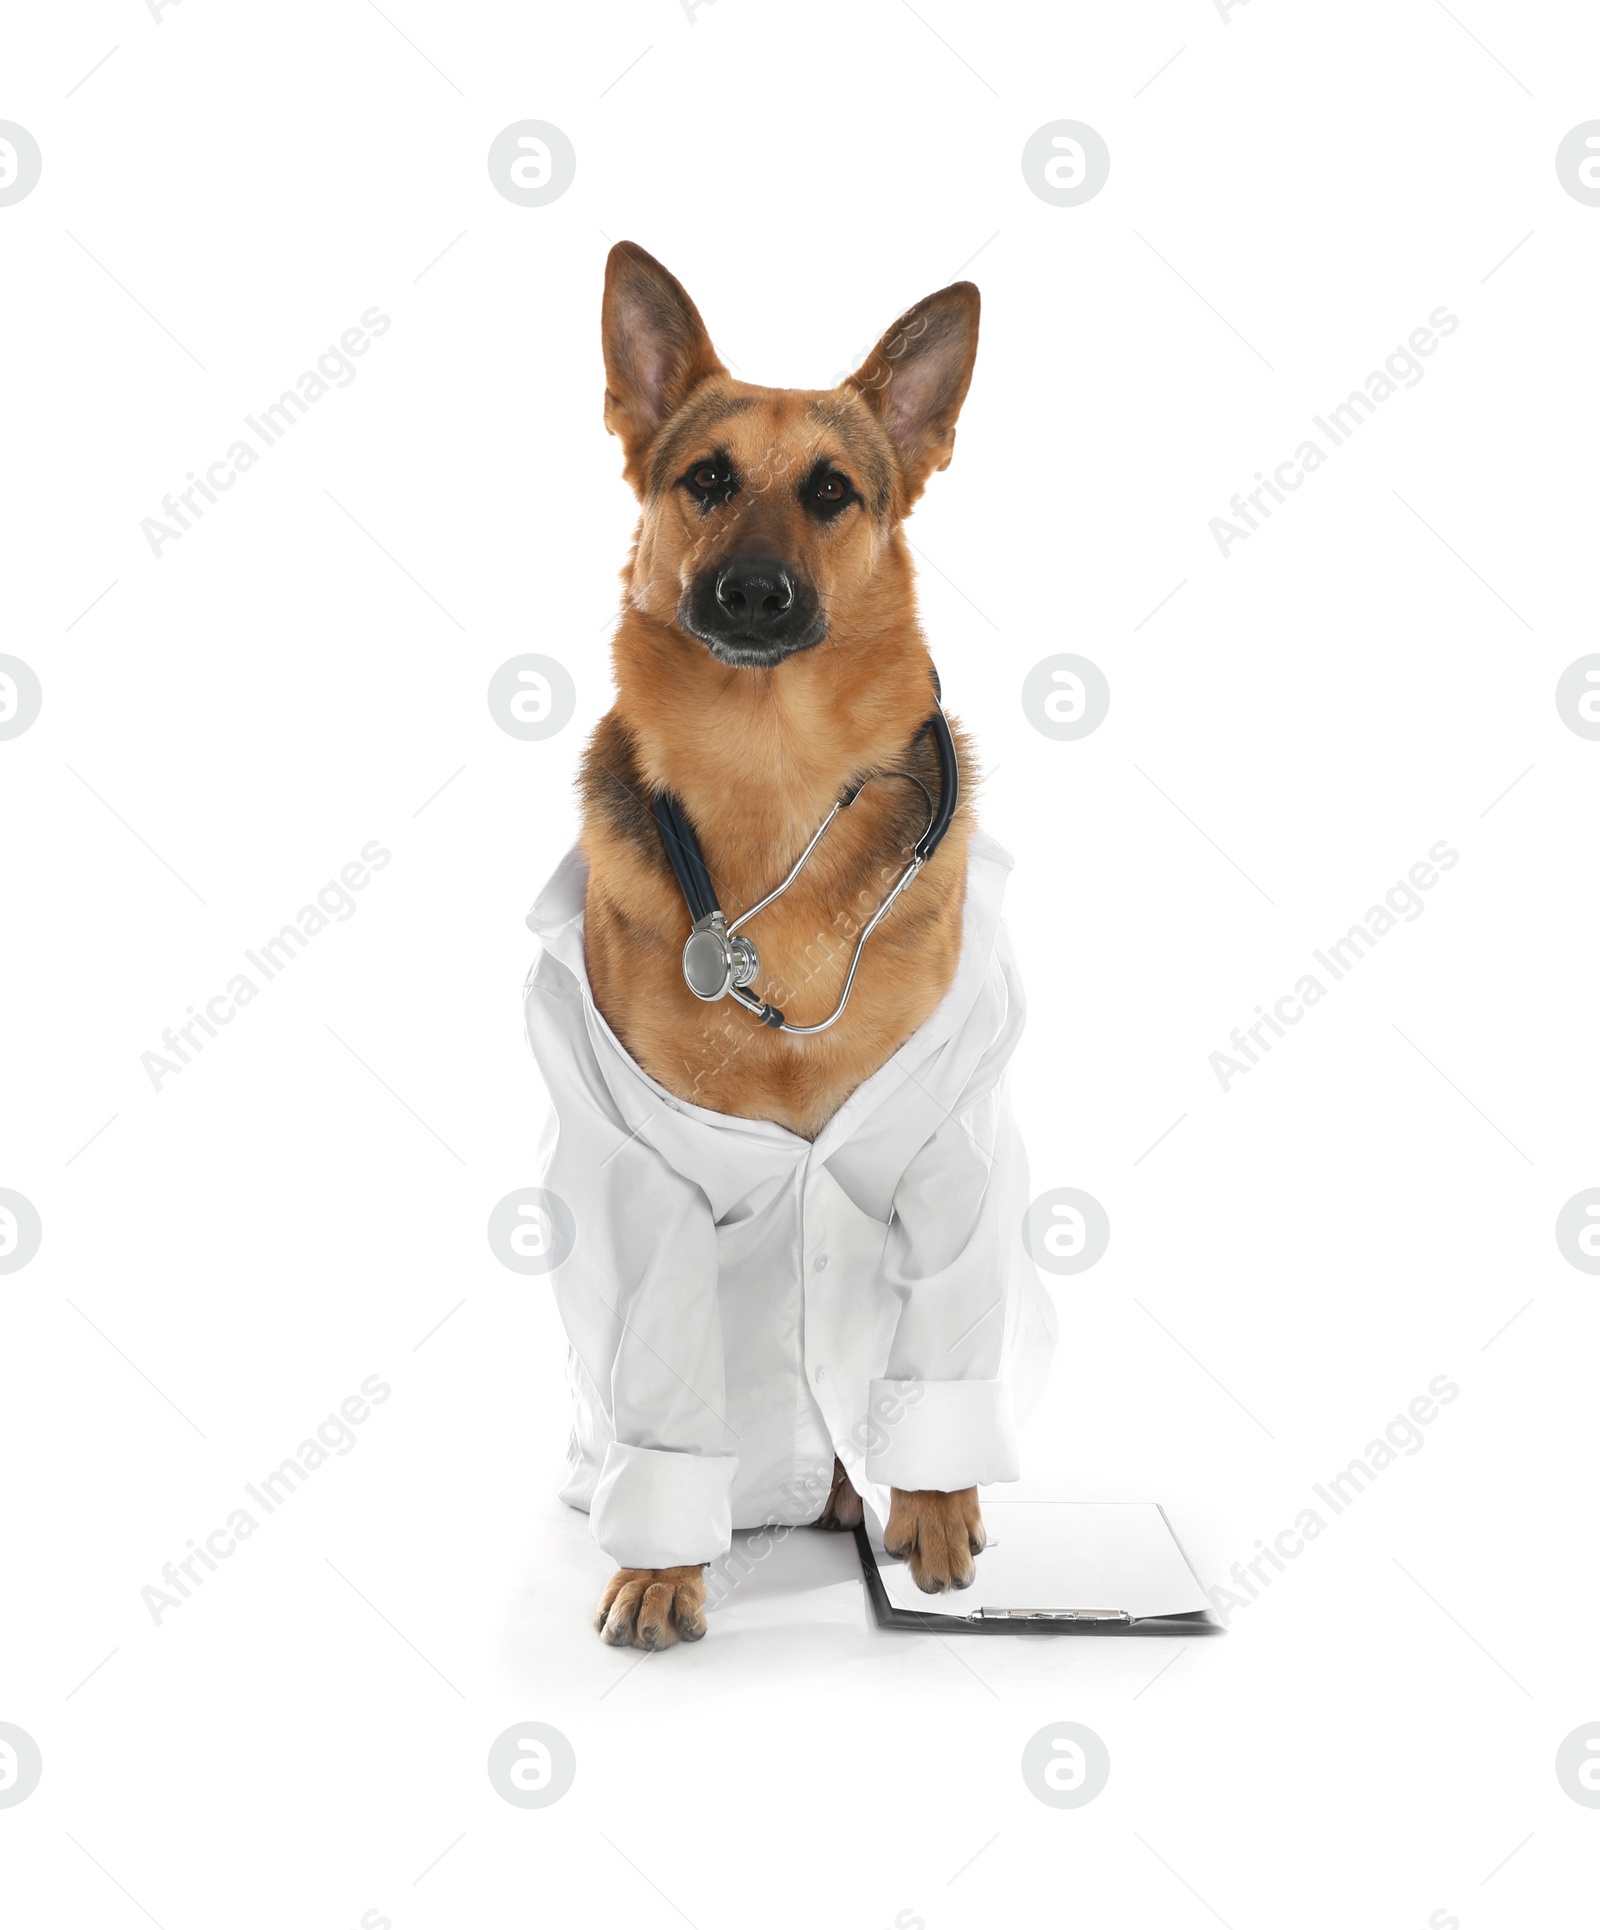 Photo of Cute dog in uniform with stethoscope and clipboard as veterinarian on white background